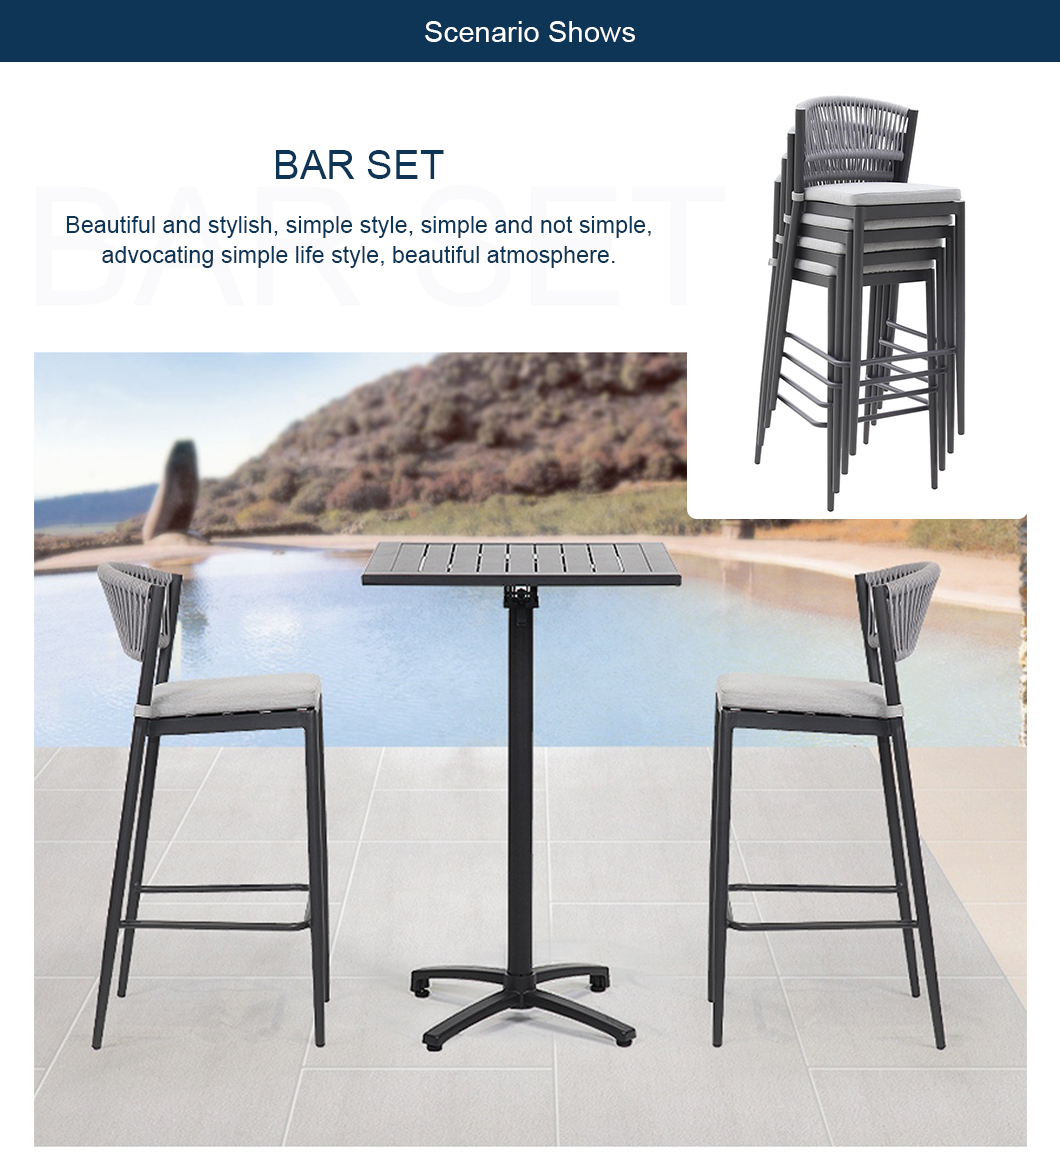 Bar Sets Garden Patio Furniture with Stool Chairs and Tables (4)